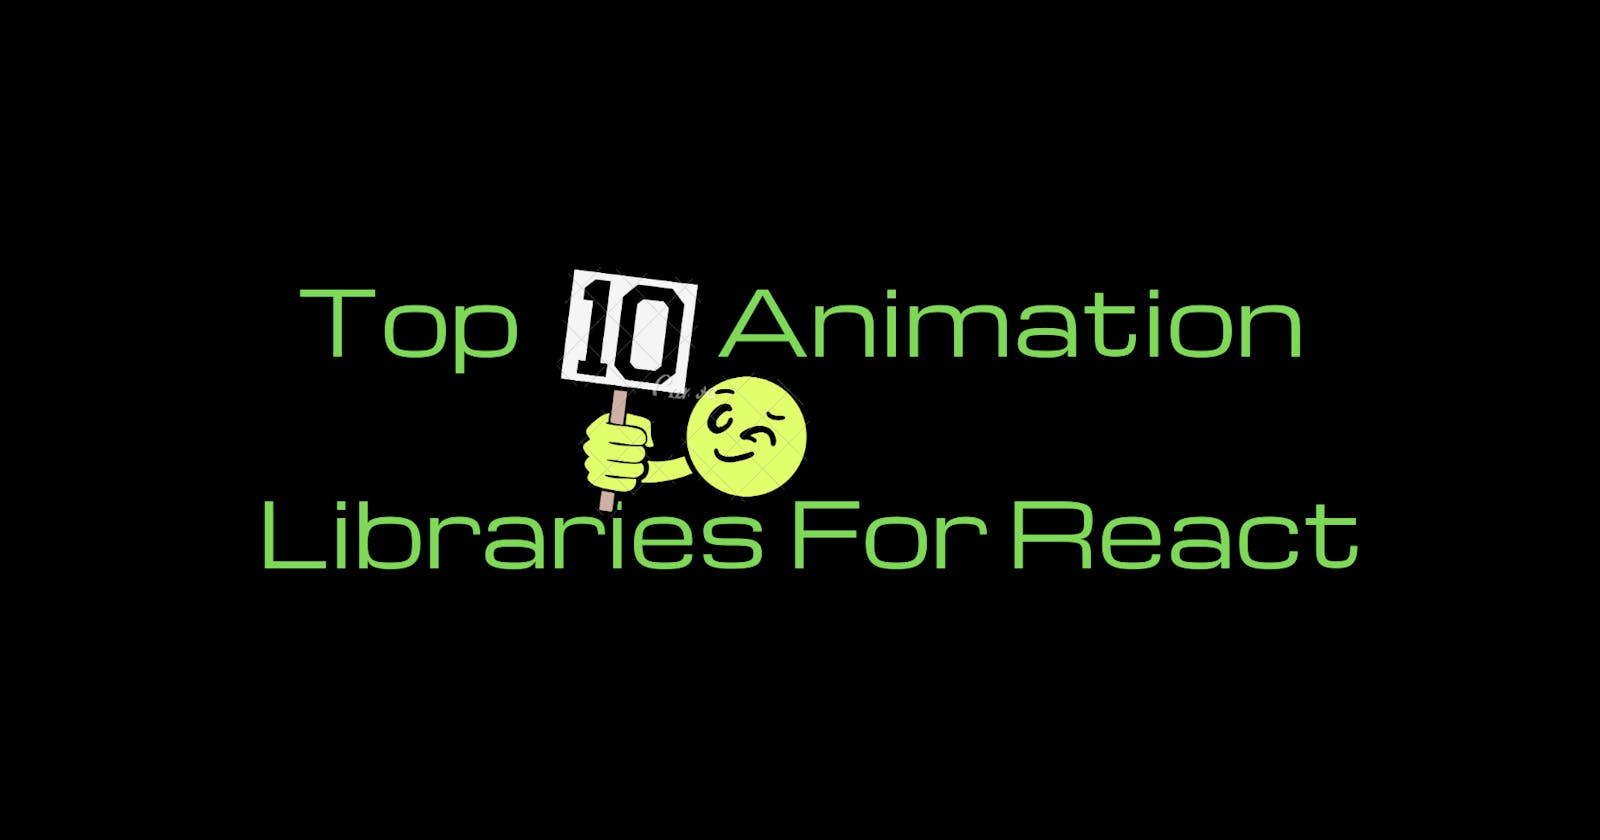 Top 10 Animation Libraries For React